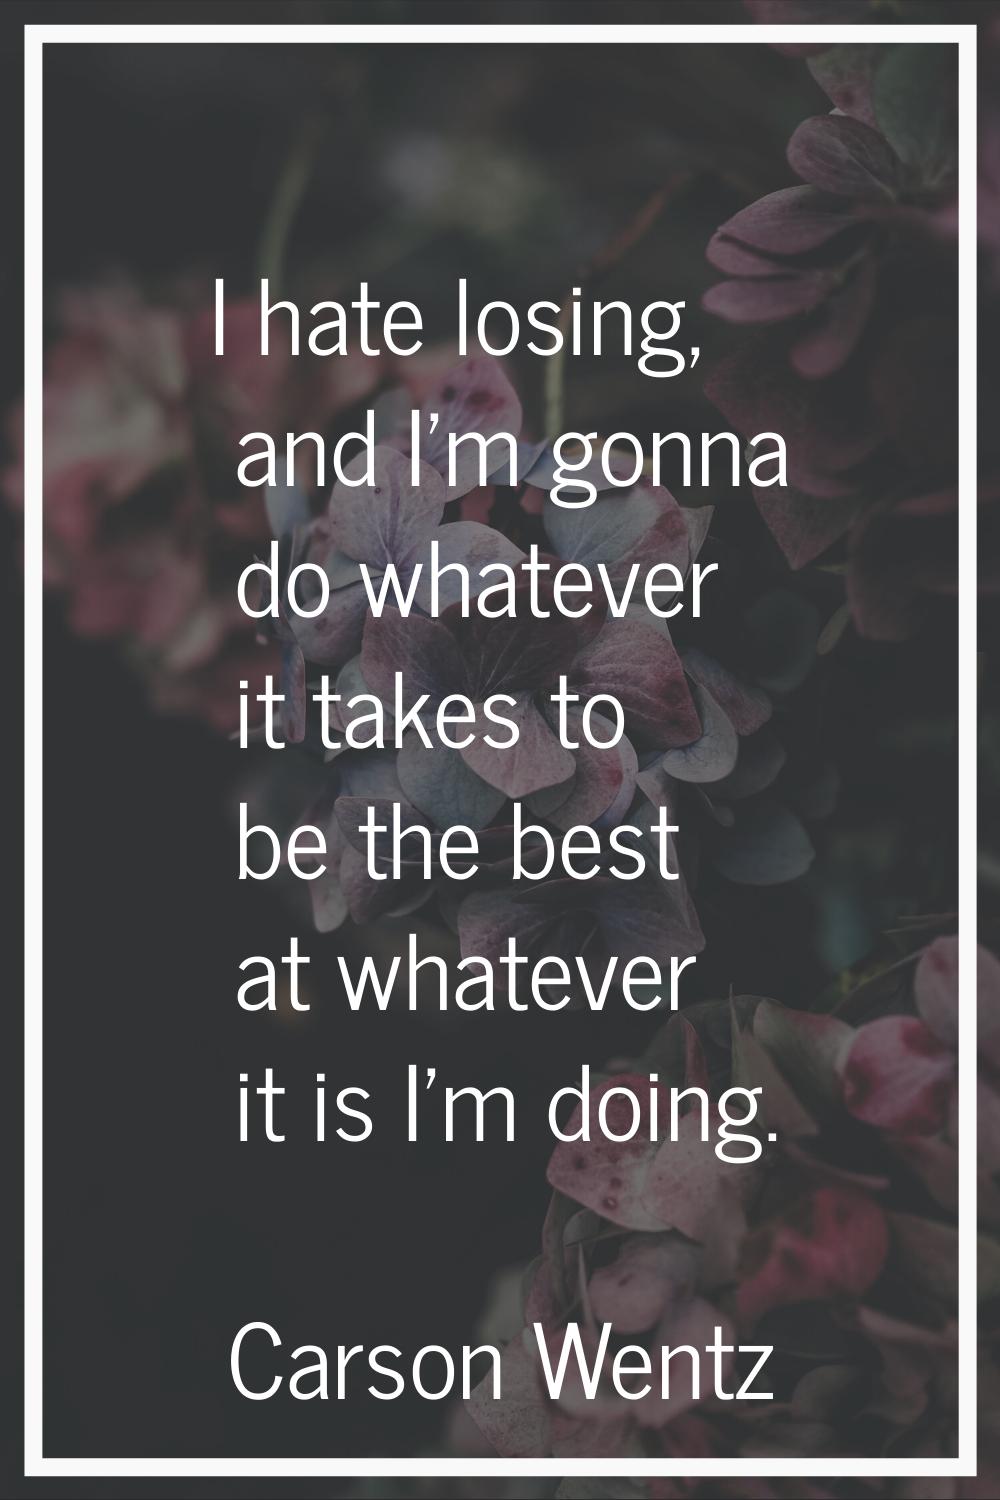 I hate losing, and I'm gonna do whatever it takes to be the best at whatever it is I'm doing.